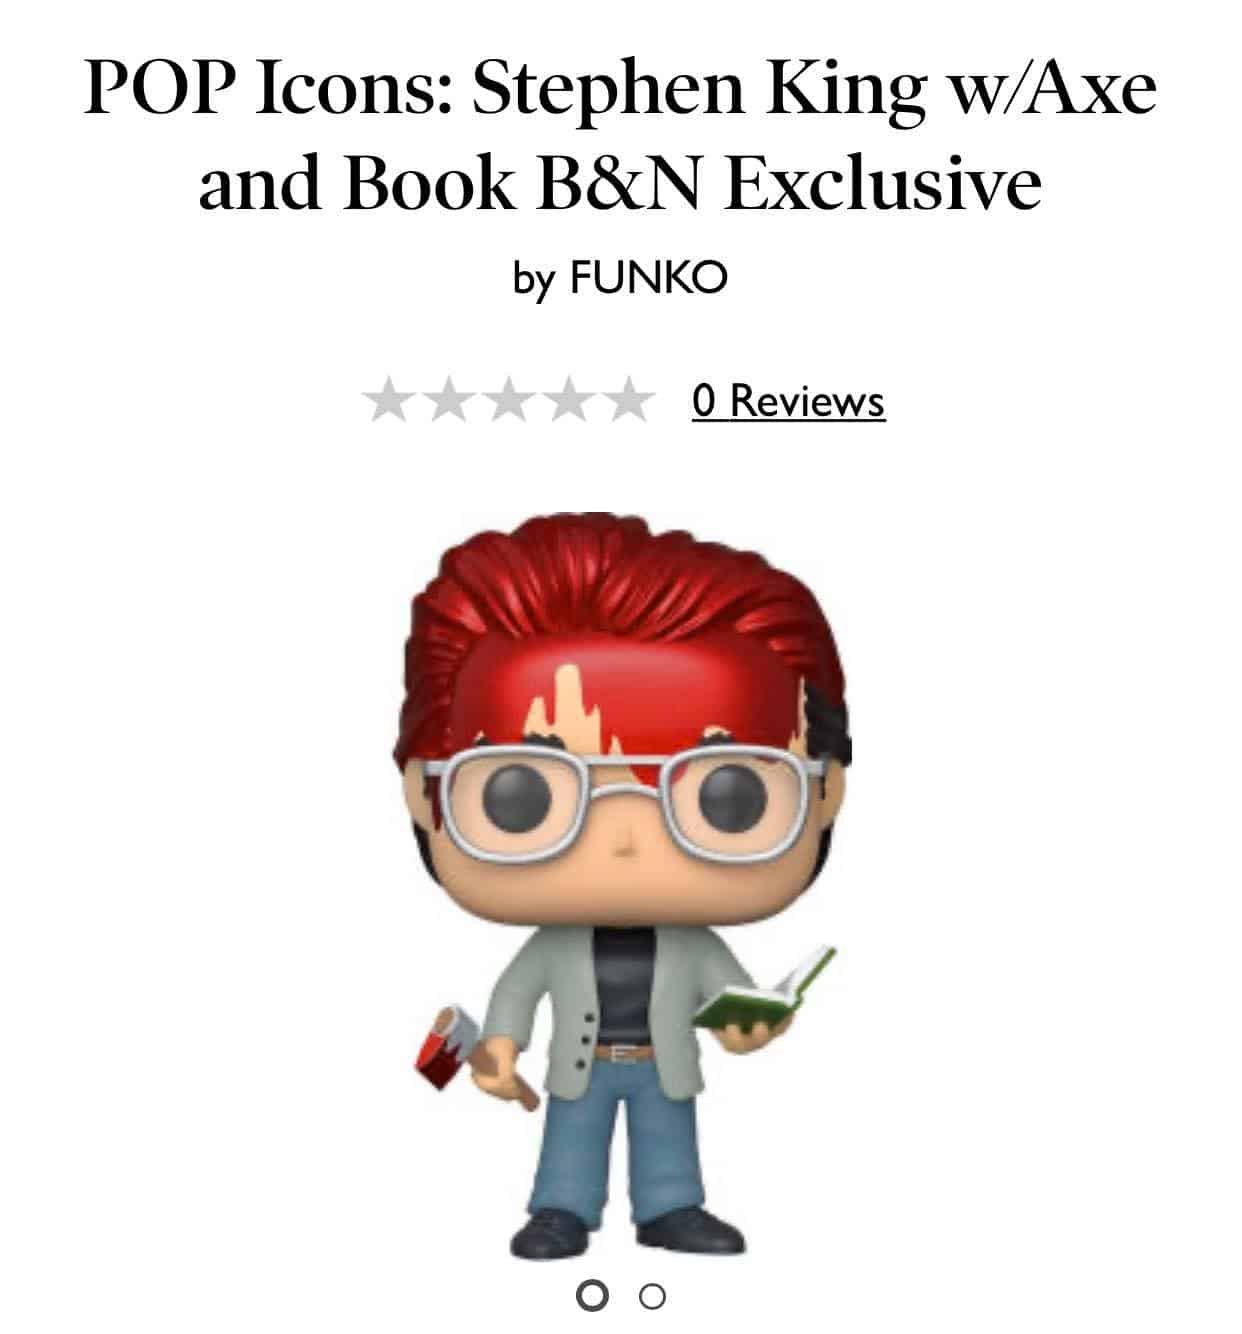 Funko POP Icons: Stephen King w/Axe and Book B&N Exclusive – Live